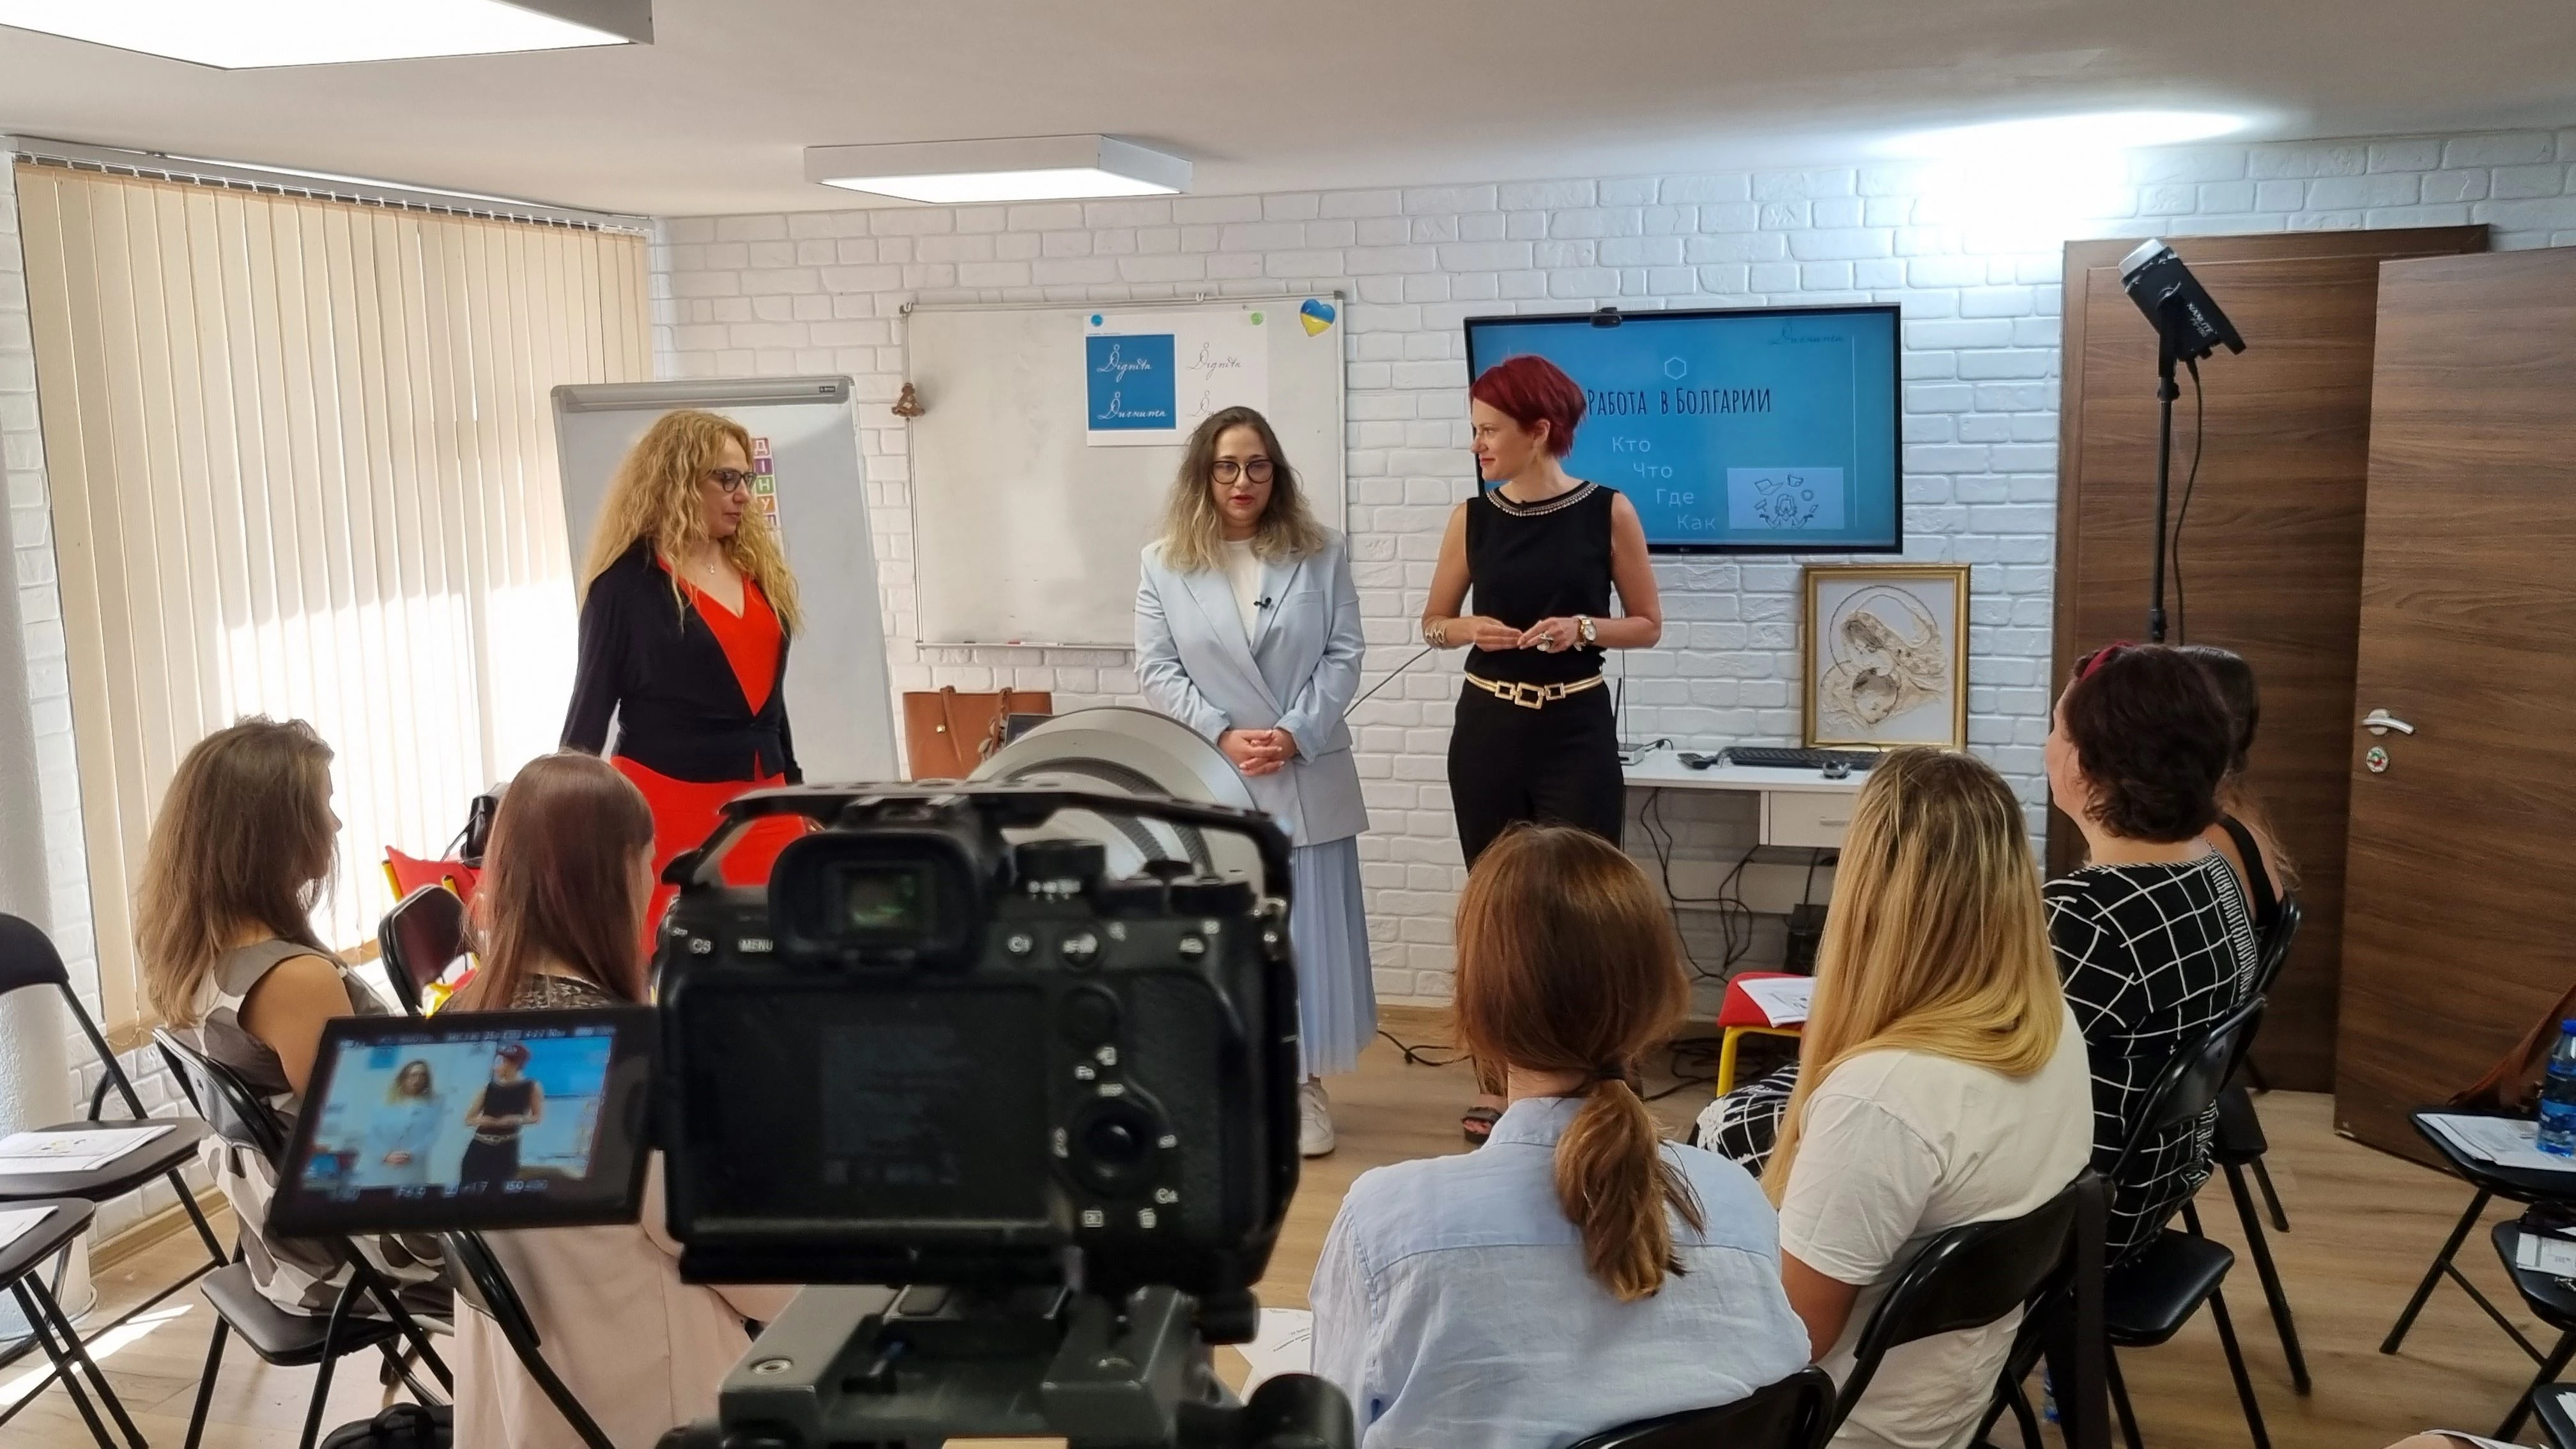 An empowering women's cirlce targeting Ukrainian women took place for the second time in Varna